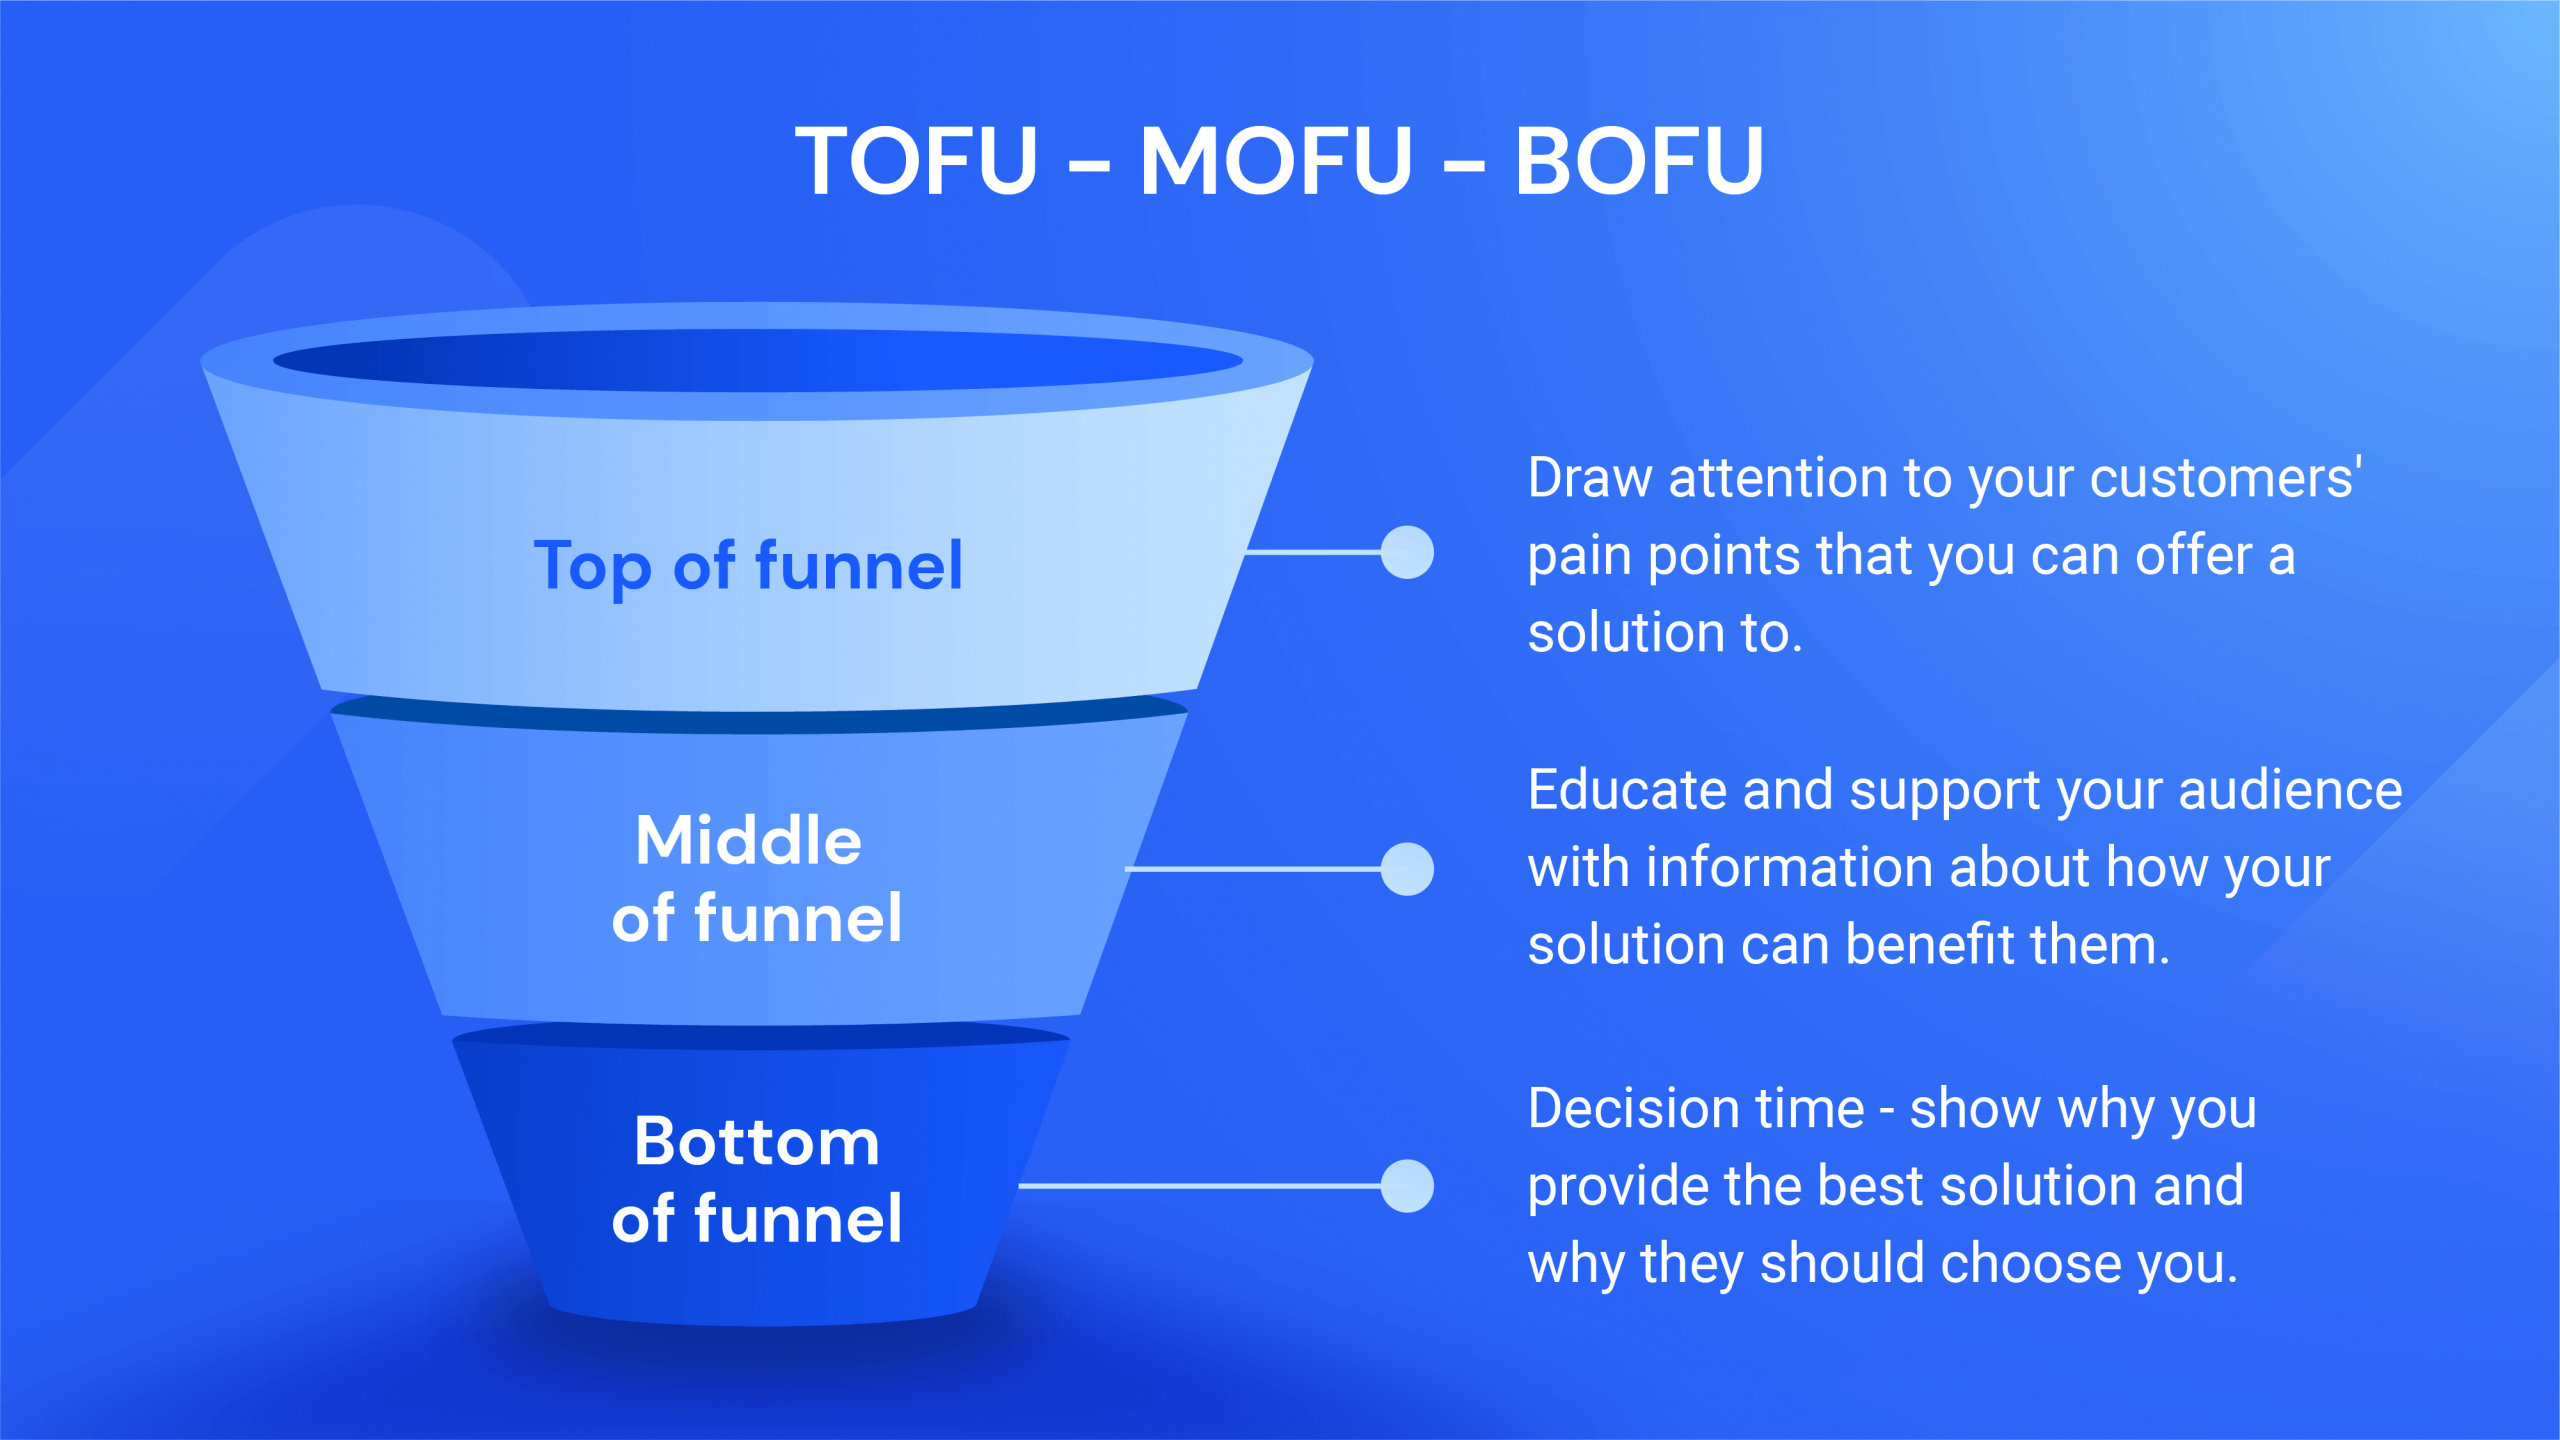 The buyer journey funnel